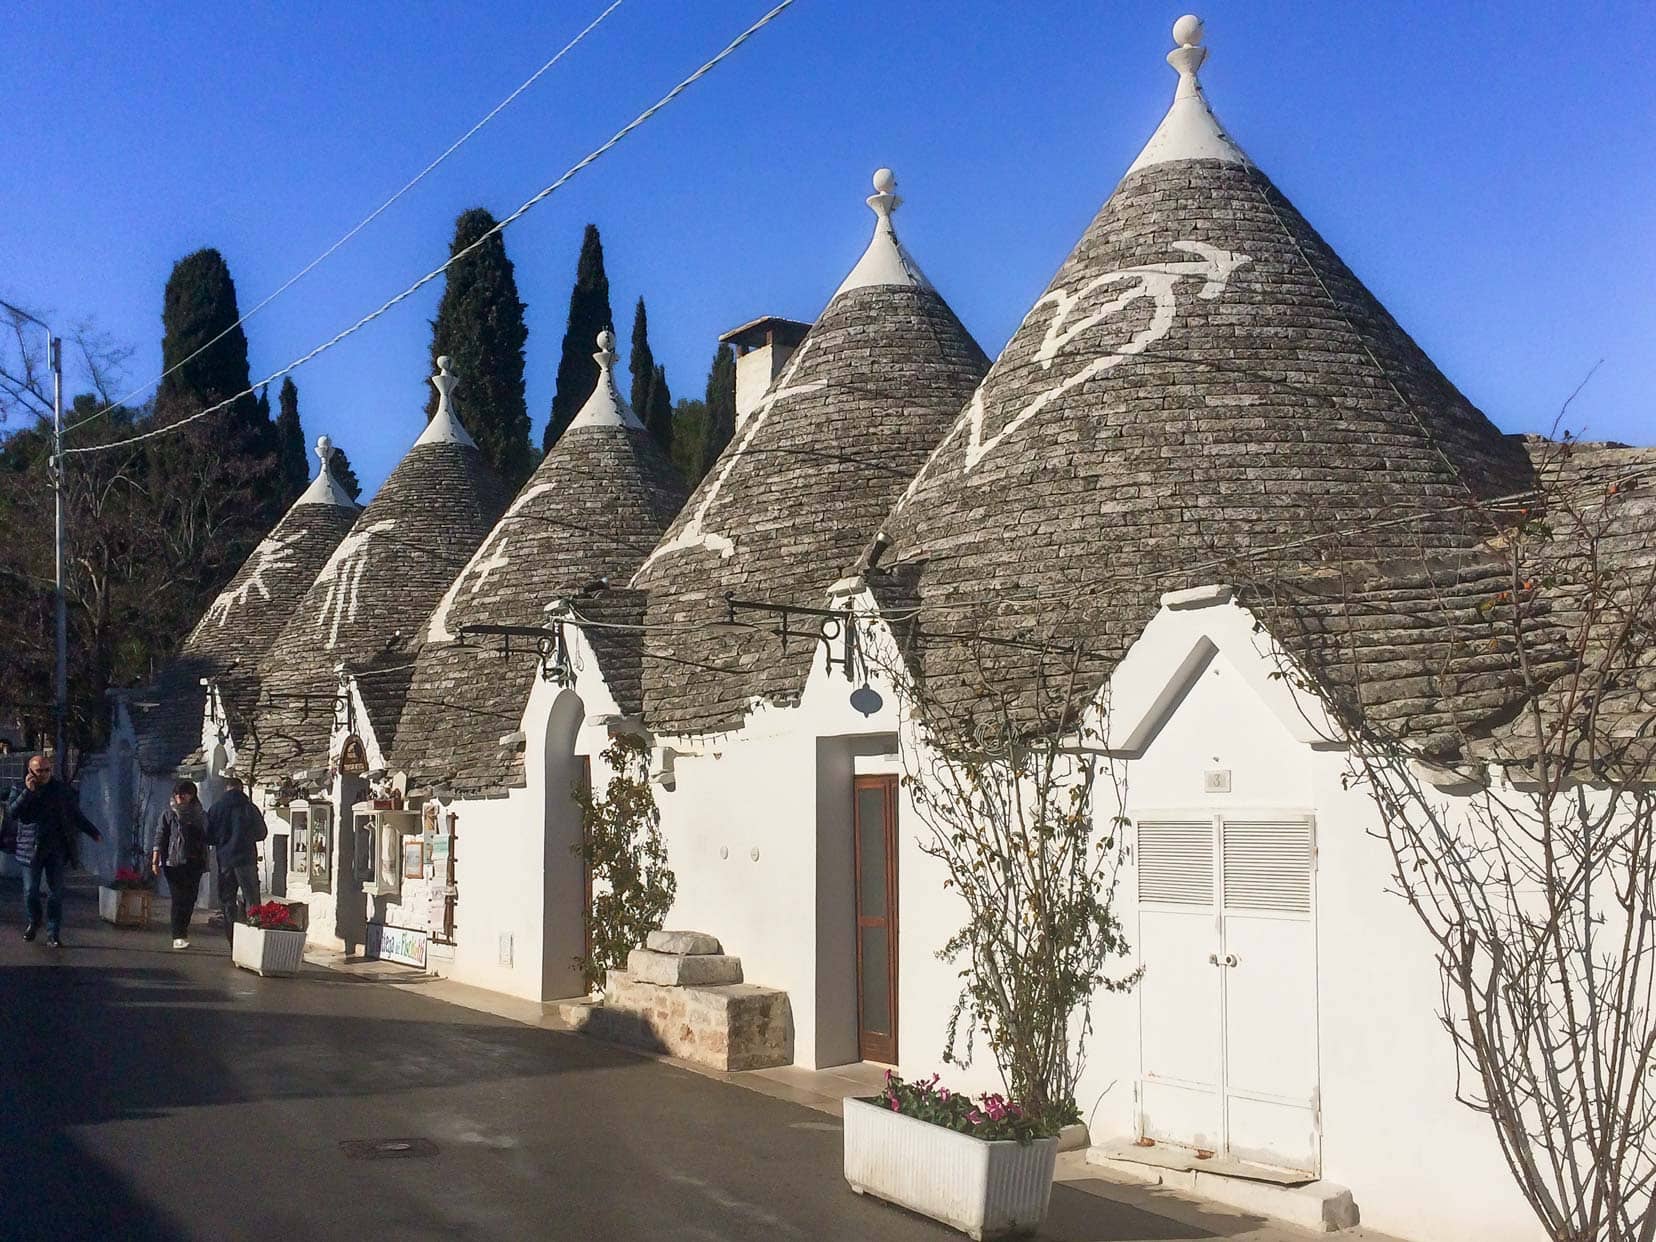 Alberobello Trulli with painted white symbols on the cone shaped stone roofs and whitewashed walls